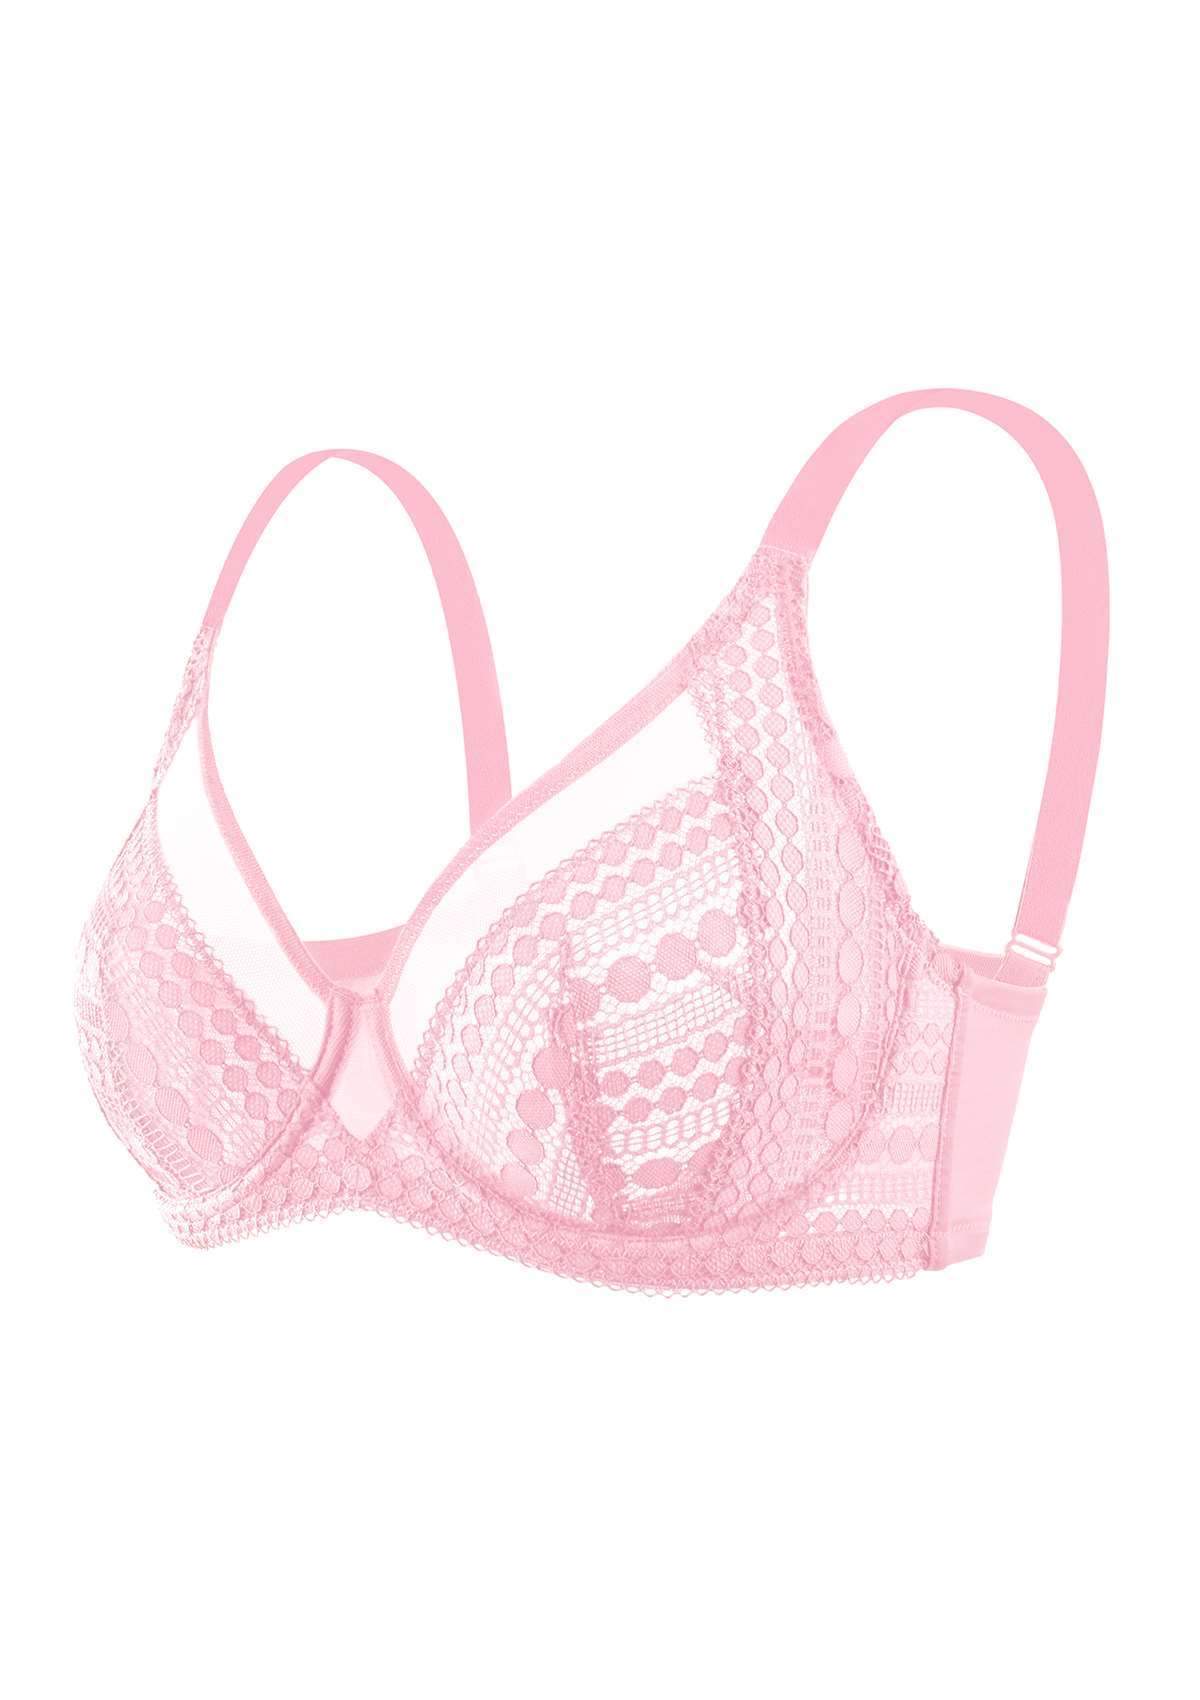 HSIA Heroine Lace Bra And Panties Set: Most Comfortable Supportive Bra - Pink / 40 / D